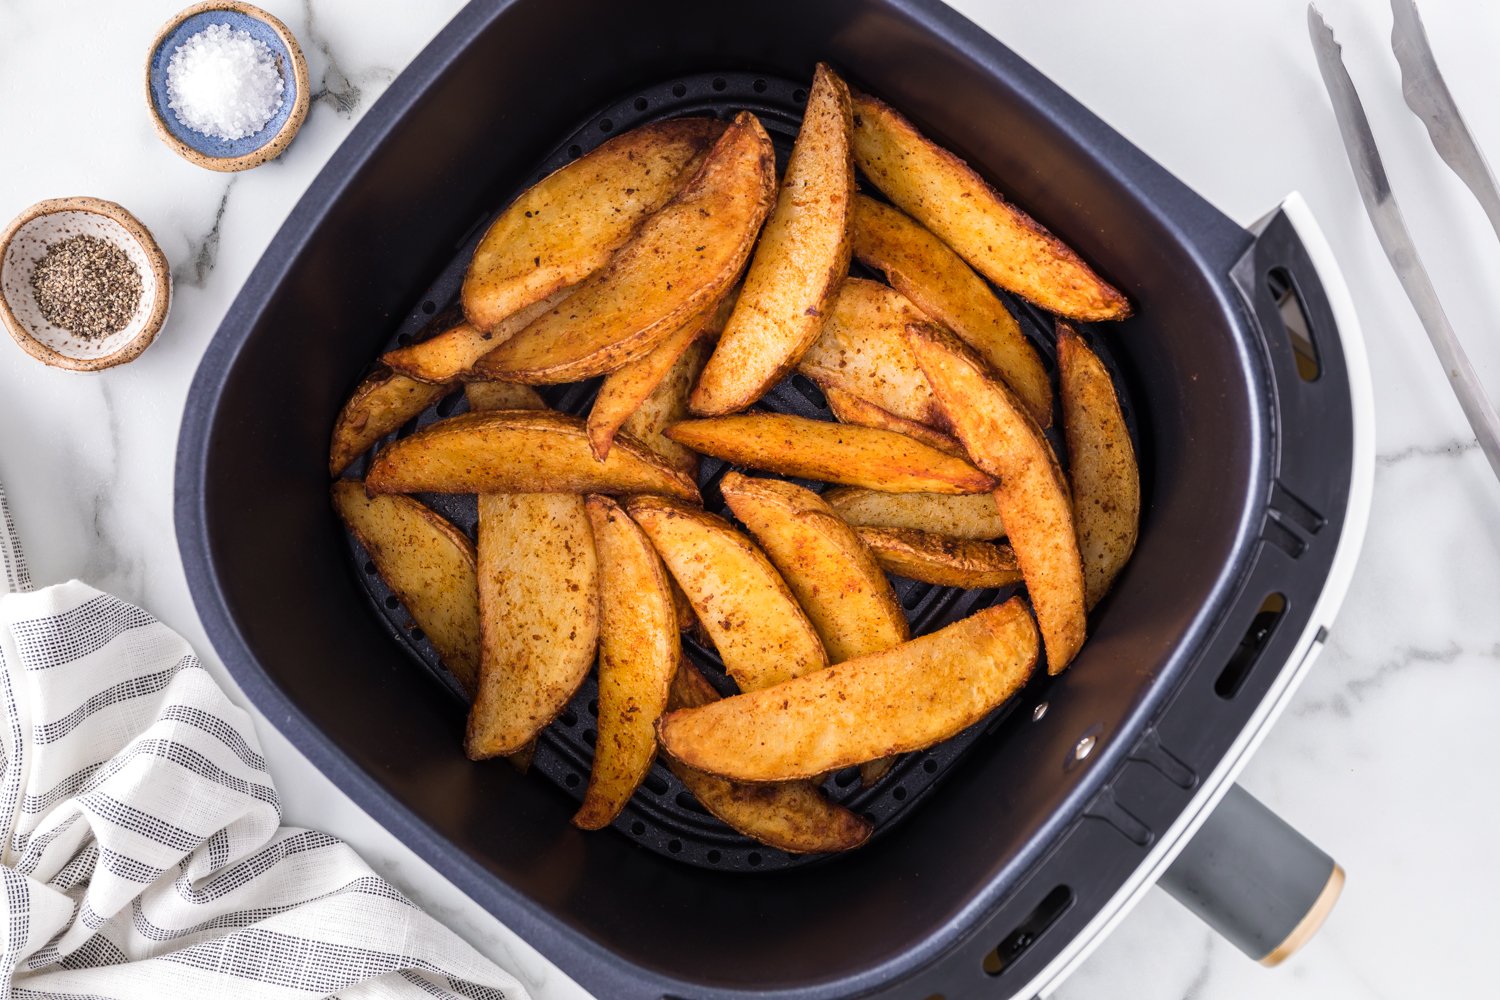 Cooked potato wedges in an air fryer basket.